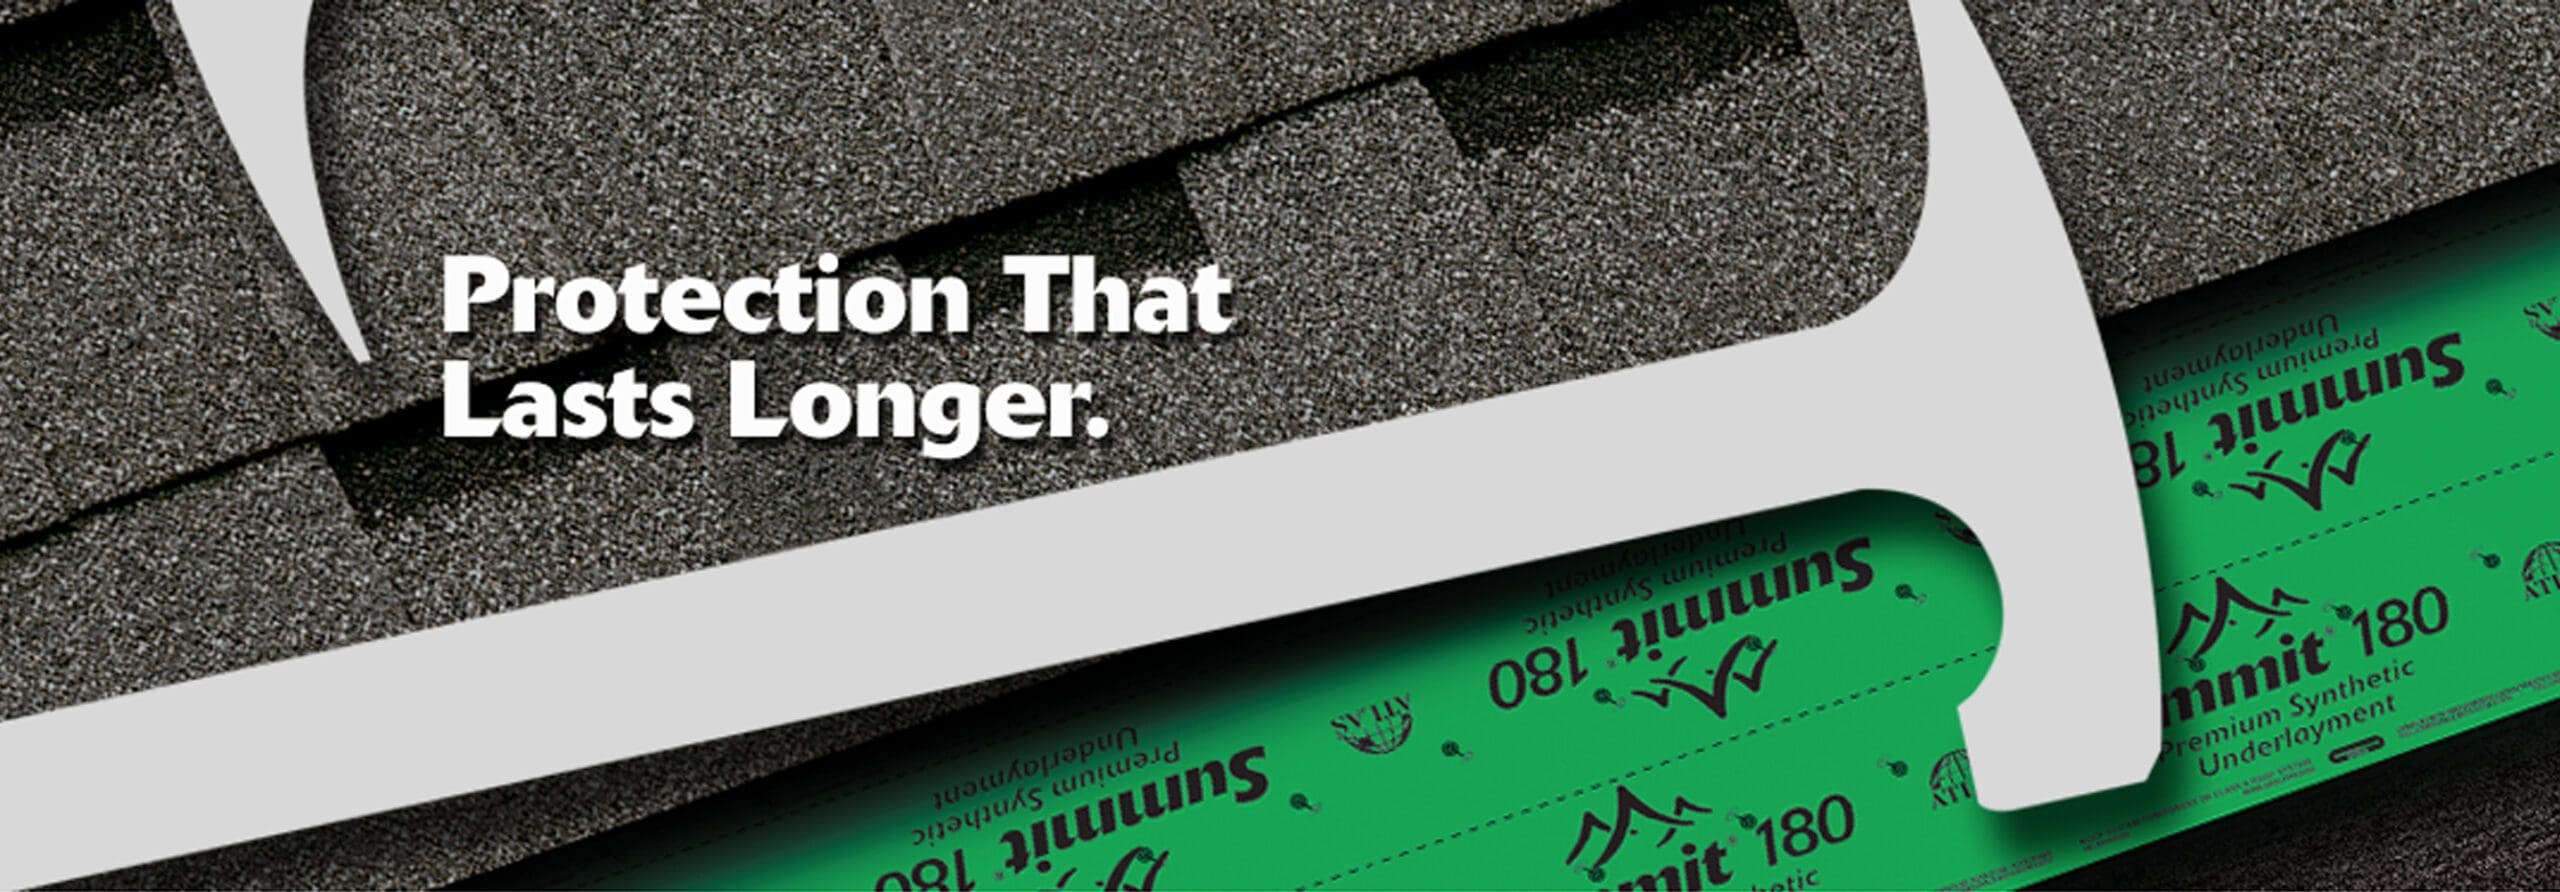 Superior Protection with Atlas Shingles